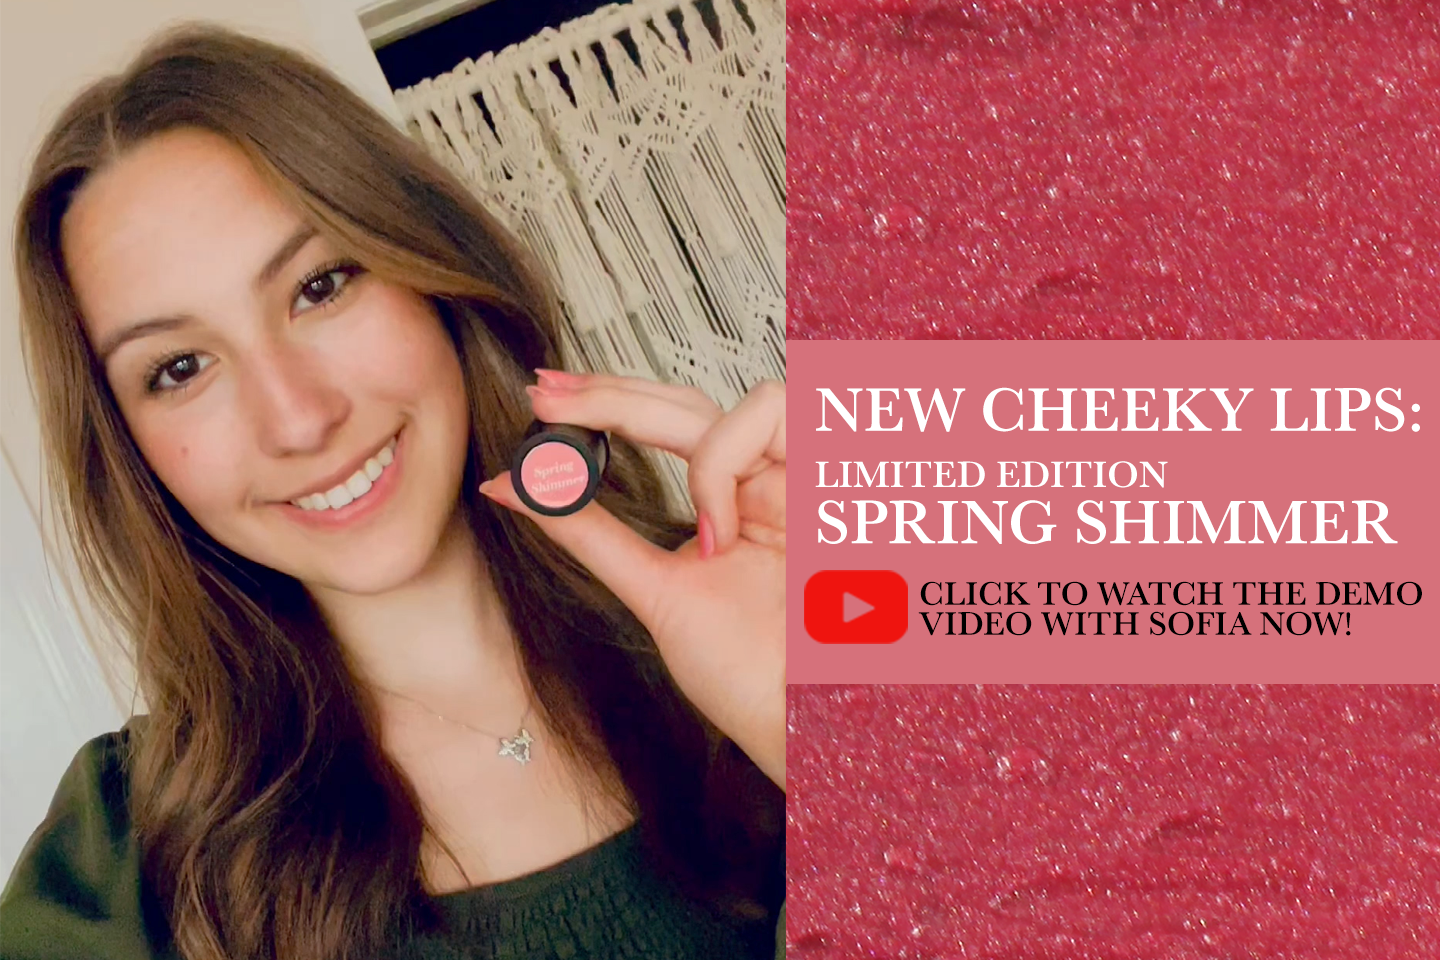 Watch The Demo Video for Cheeky Lips Spring Shimmer